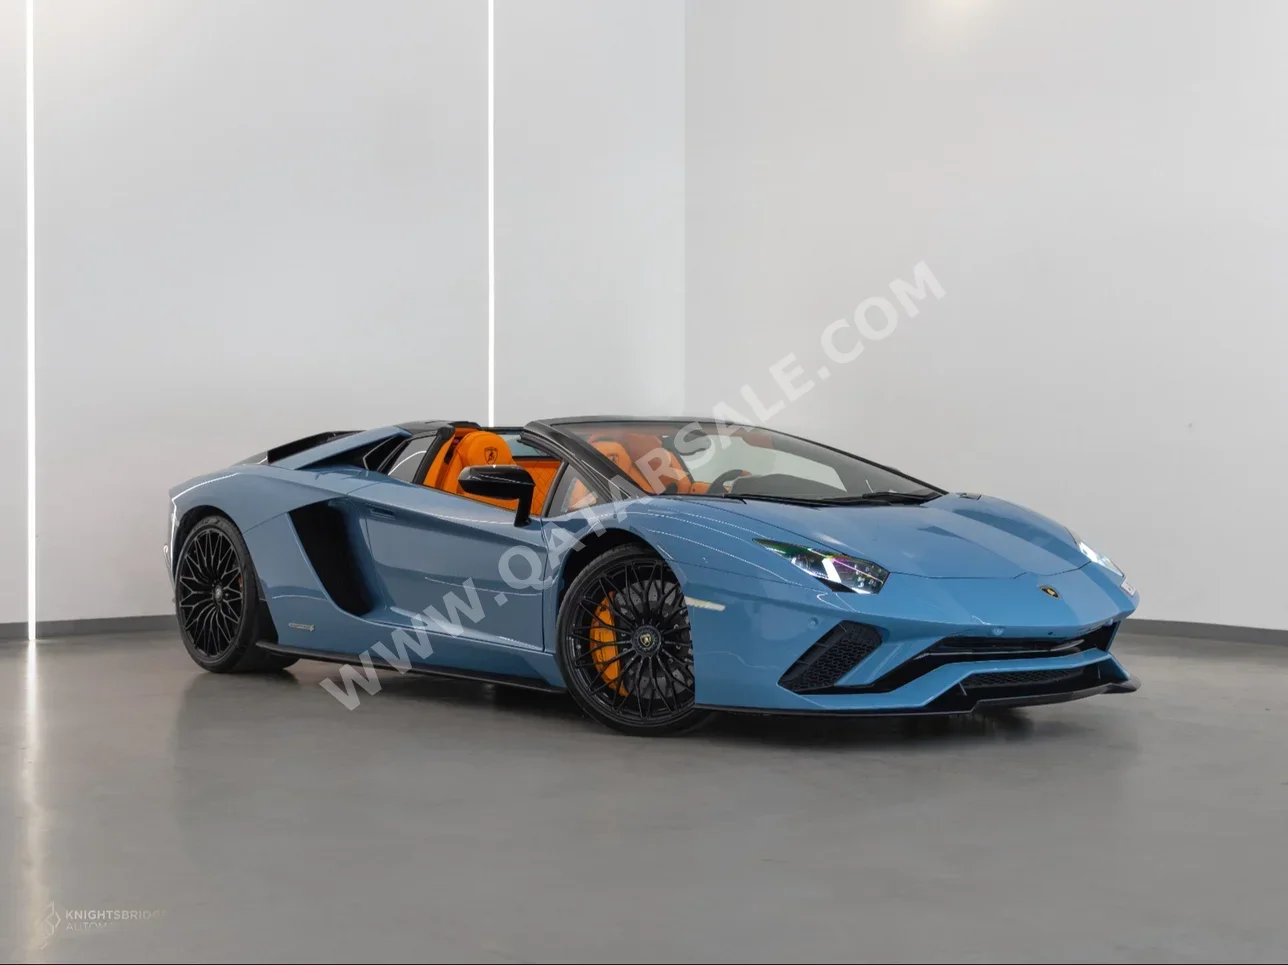 Lamborghini  Aventador  S Roadster  2019  Automatic  34,500 Km  12 Cylinder  Rear Wheel Drive (RWD)  Convertible  Blue  With Warranty